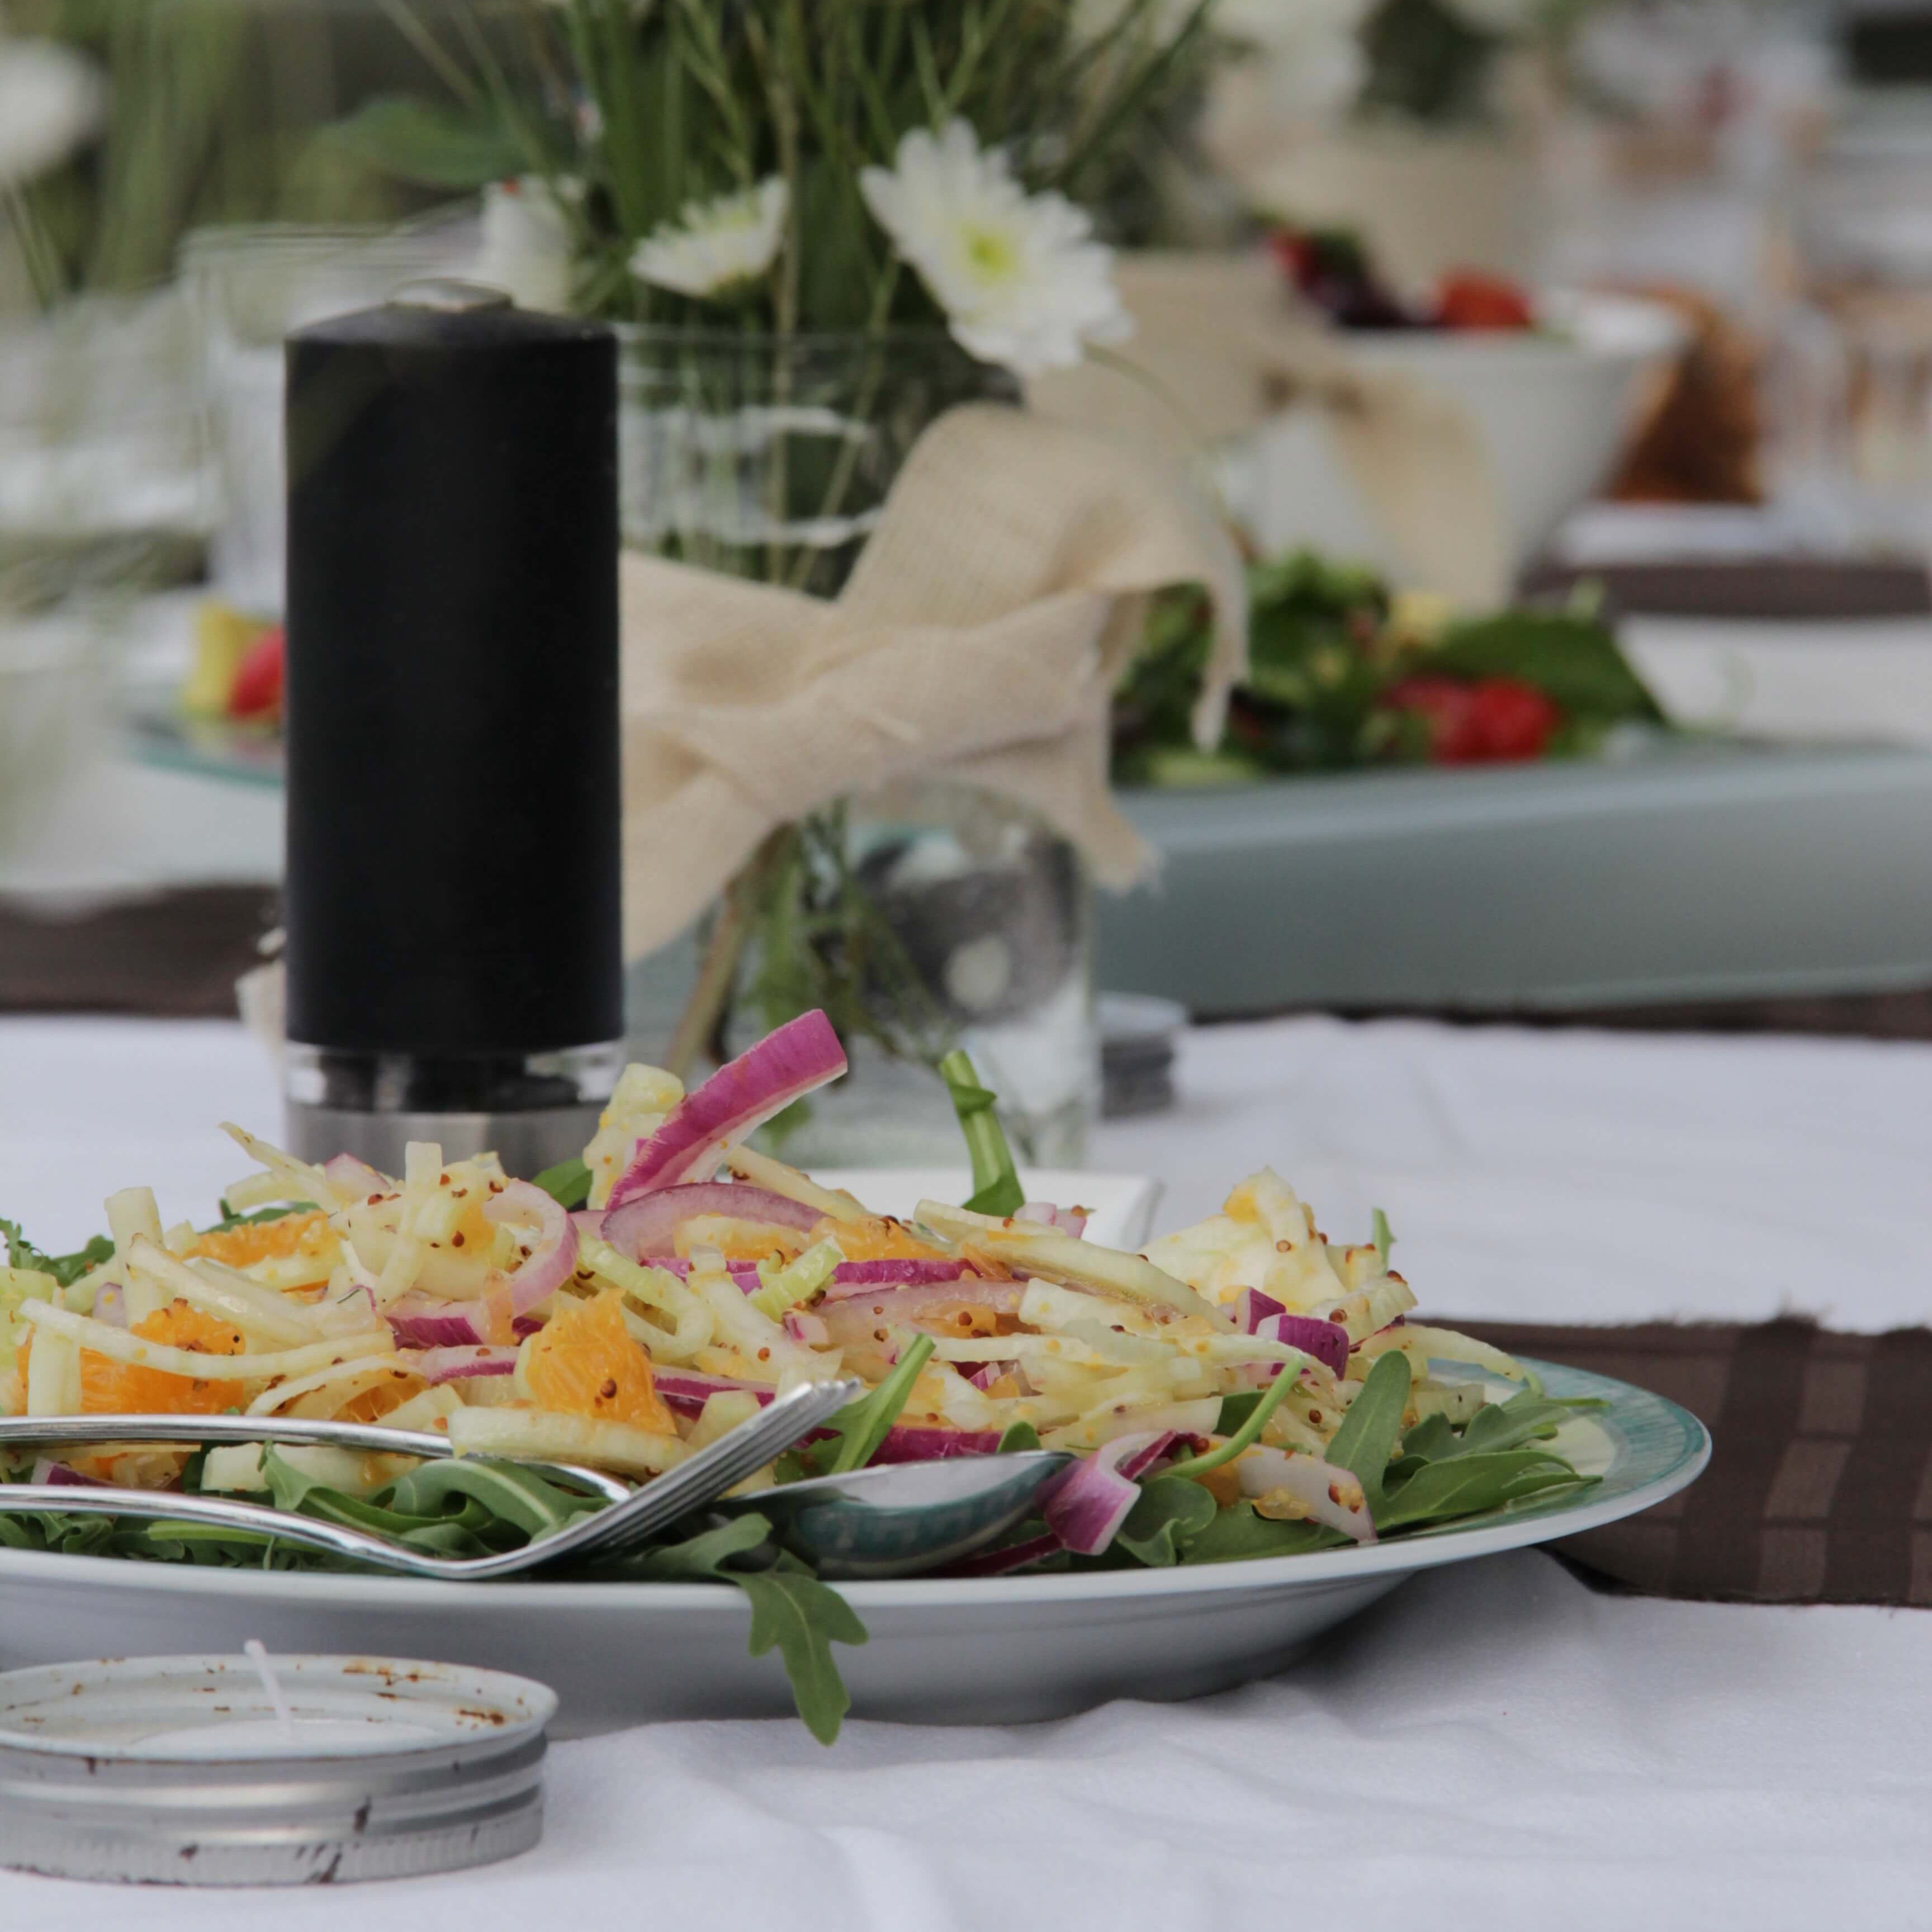 Table set for a banquet with fresh salads, florals in vases & a pepper shaker